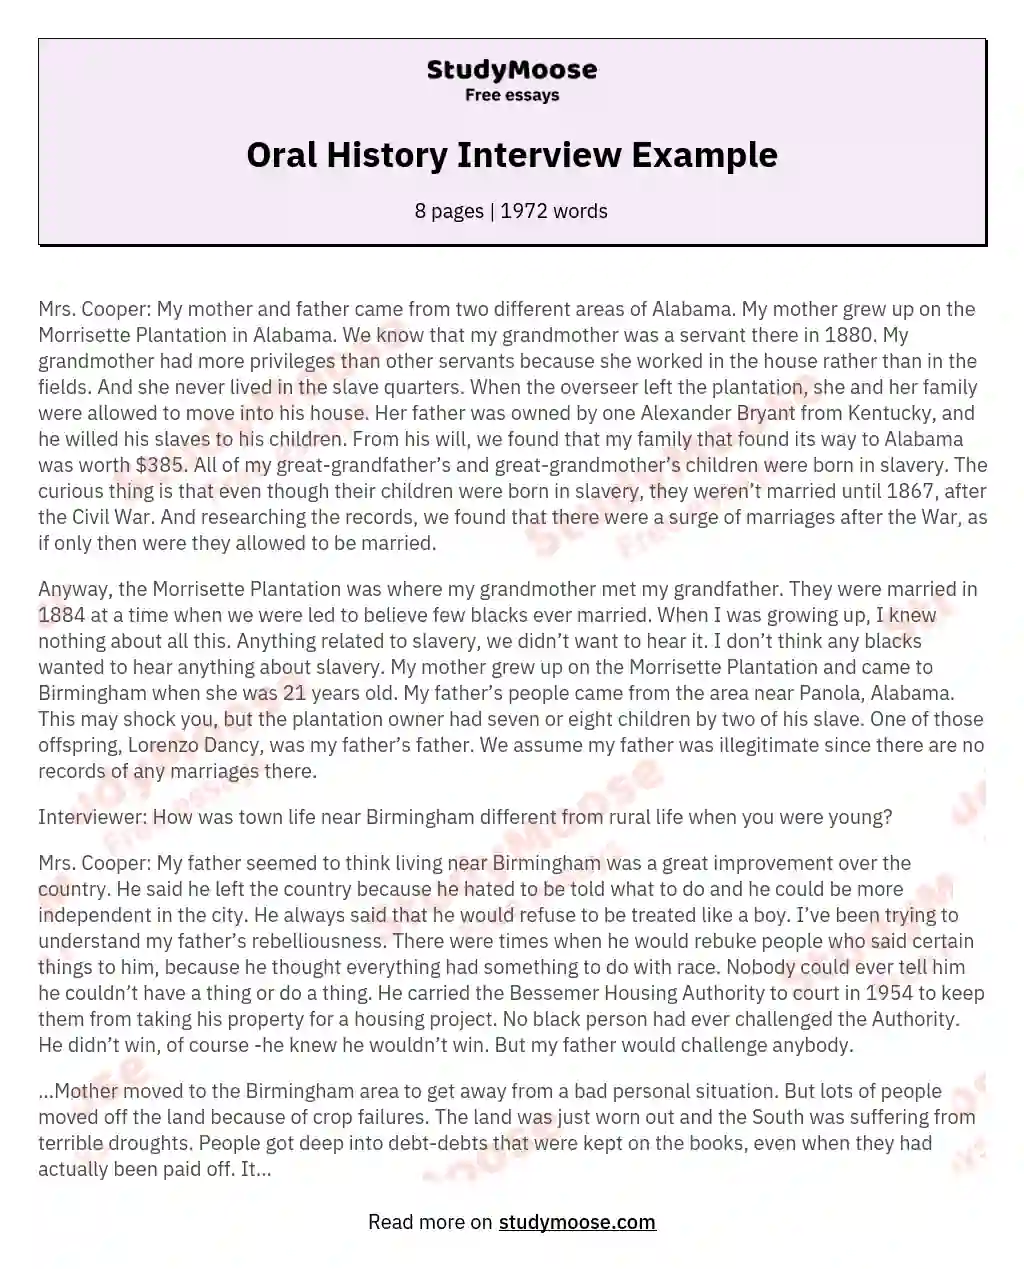 Oral History Interview Example essay